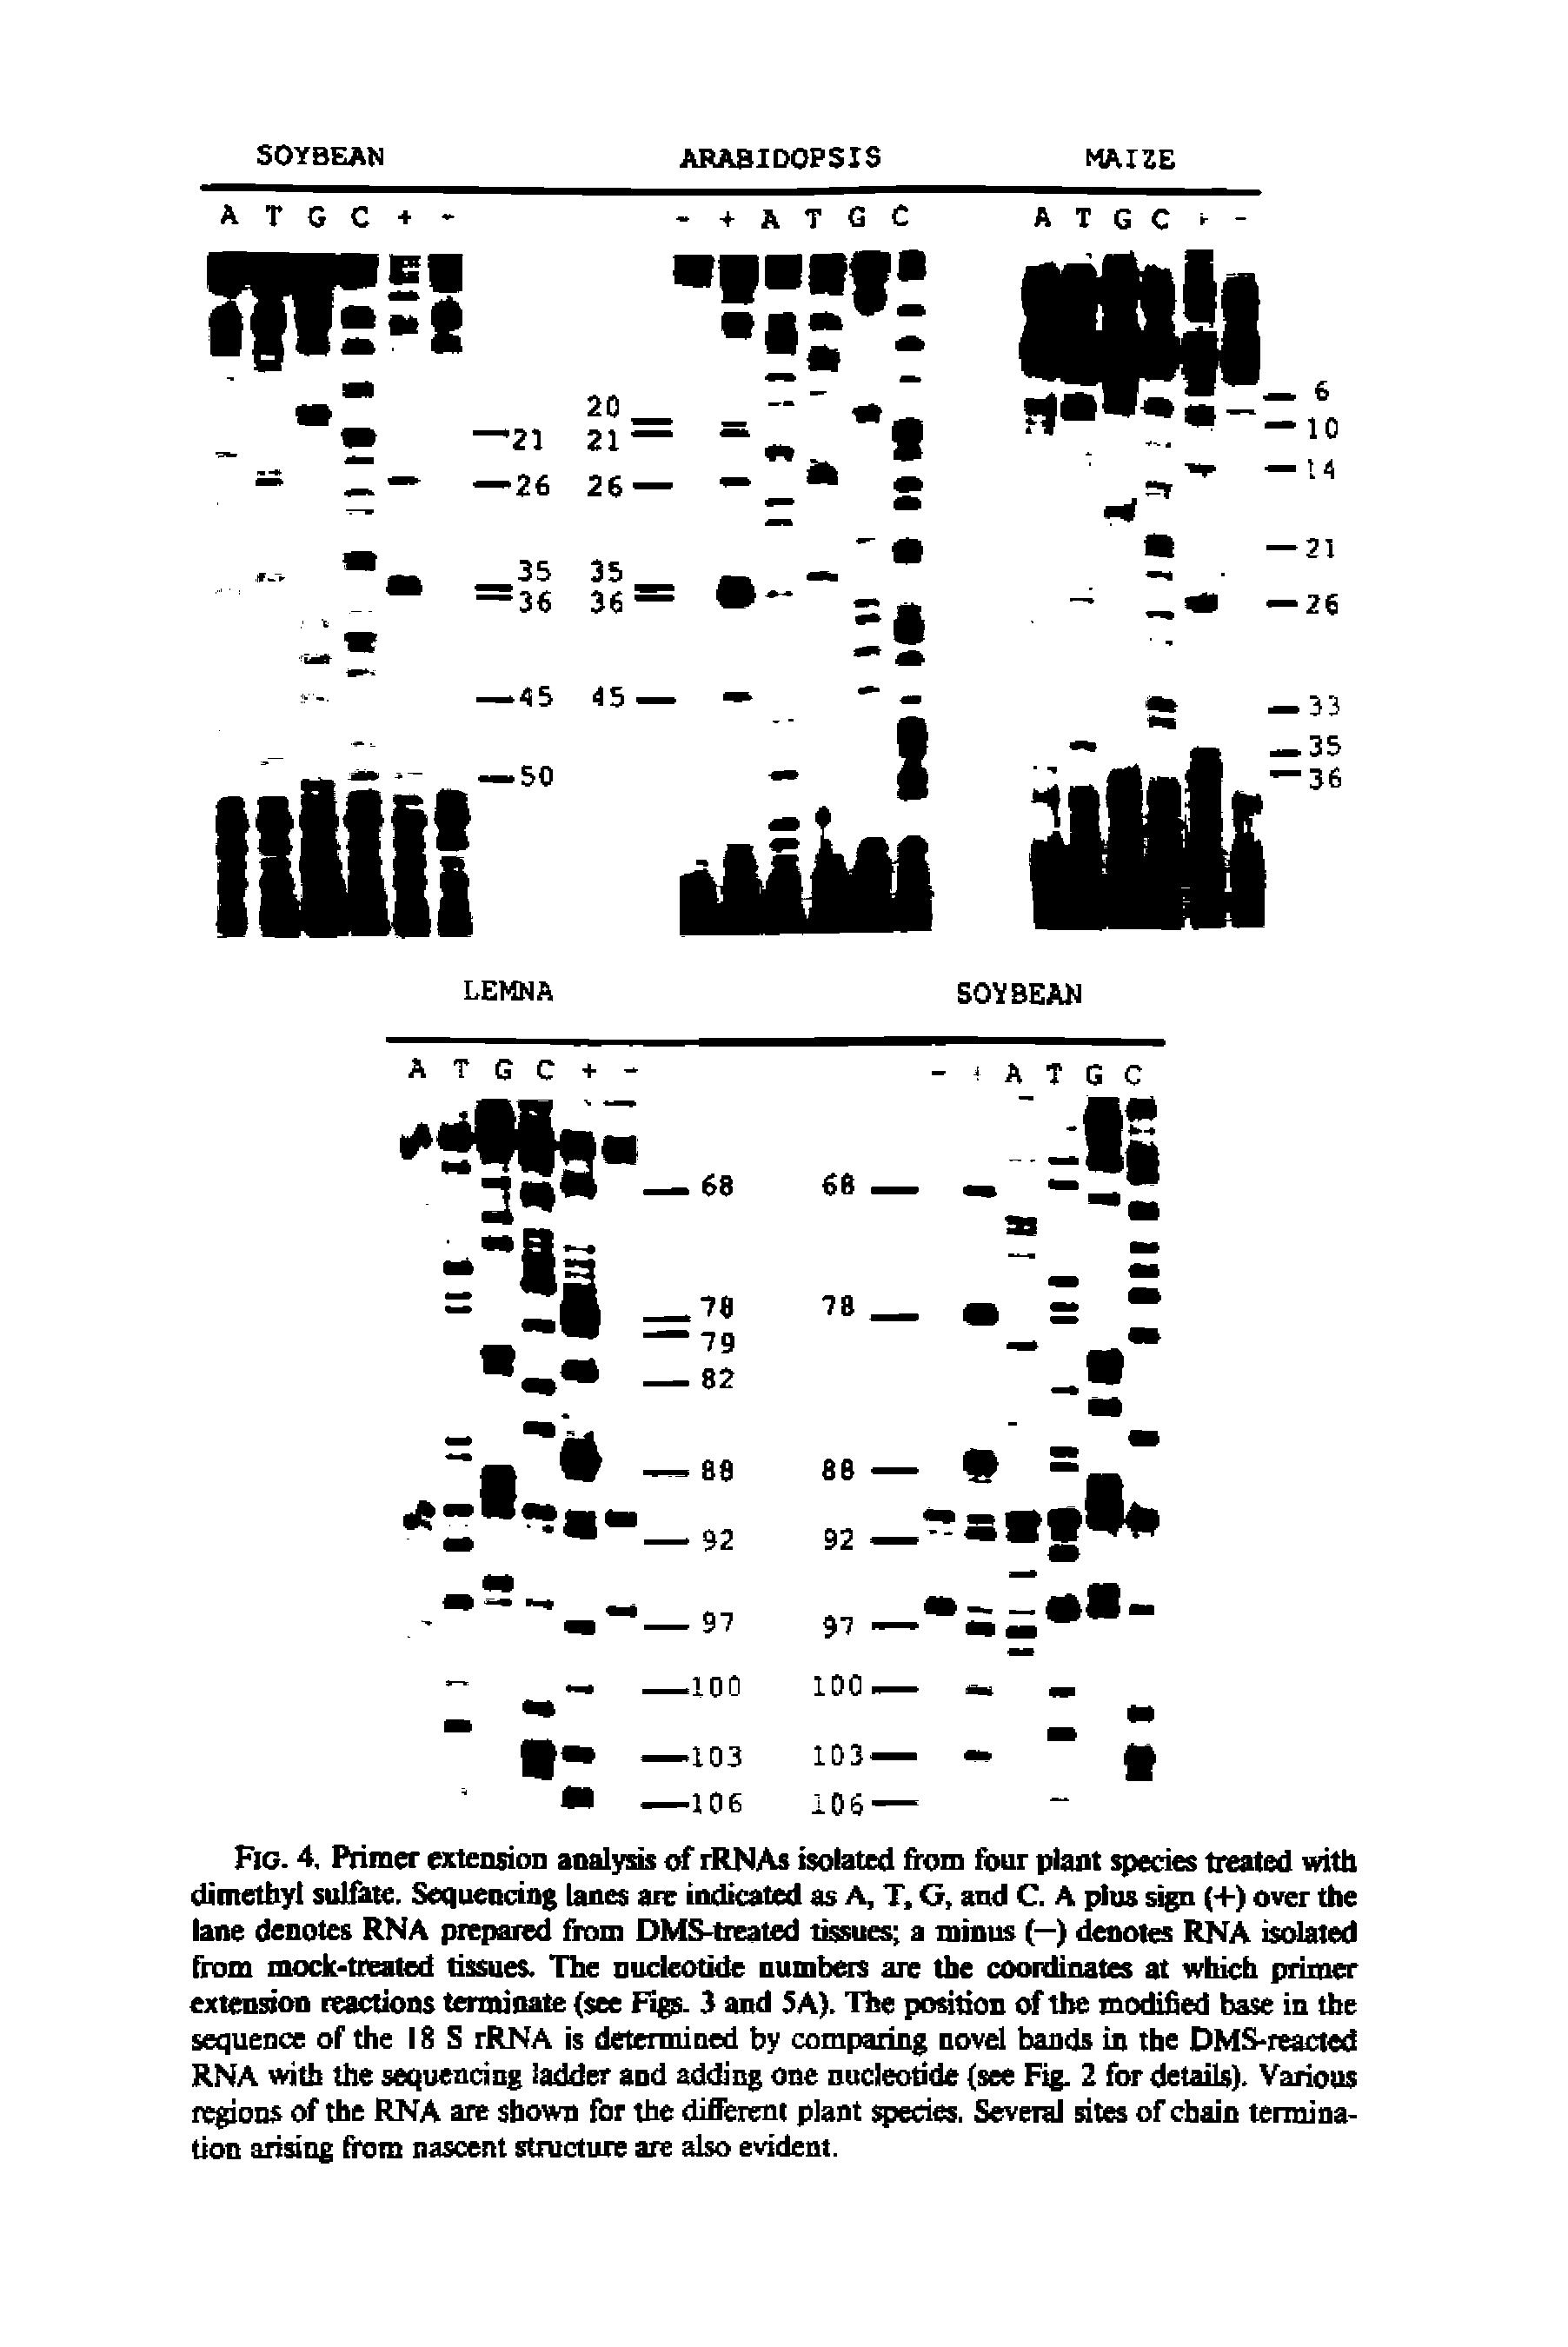 Fig. 4. Primer extension analysis of rRNAs isolated from four plant species treated with dimethyl sulfate. Sequencing lanes are indicated as A, T, G, and C. A plus sign (+) over the lane denotes RNA prepared from DMS-treated tissues a minus (—) denotes RNA isolated from mock-treated tissues. The nucleotide numbers are the coordinates at which primer extension reactions terminate (see Figs- 3 and 5A). The position of the modified base in the sequence of the 18 S rRNA is determined by comparing novel bands in the DMS-reacted RNA with the sequencing ladder and adding one nucleotide (see Fig. 2 for details). Various regions of the RNA are shown for the different plant species. Several sites of chain termination arising from nascent structure are also evident.